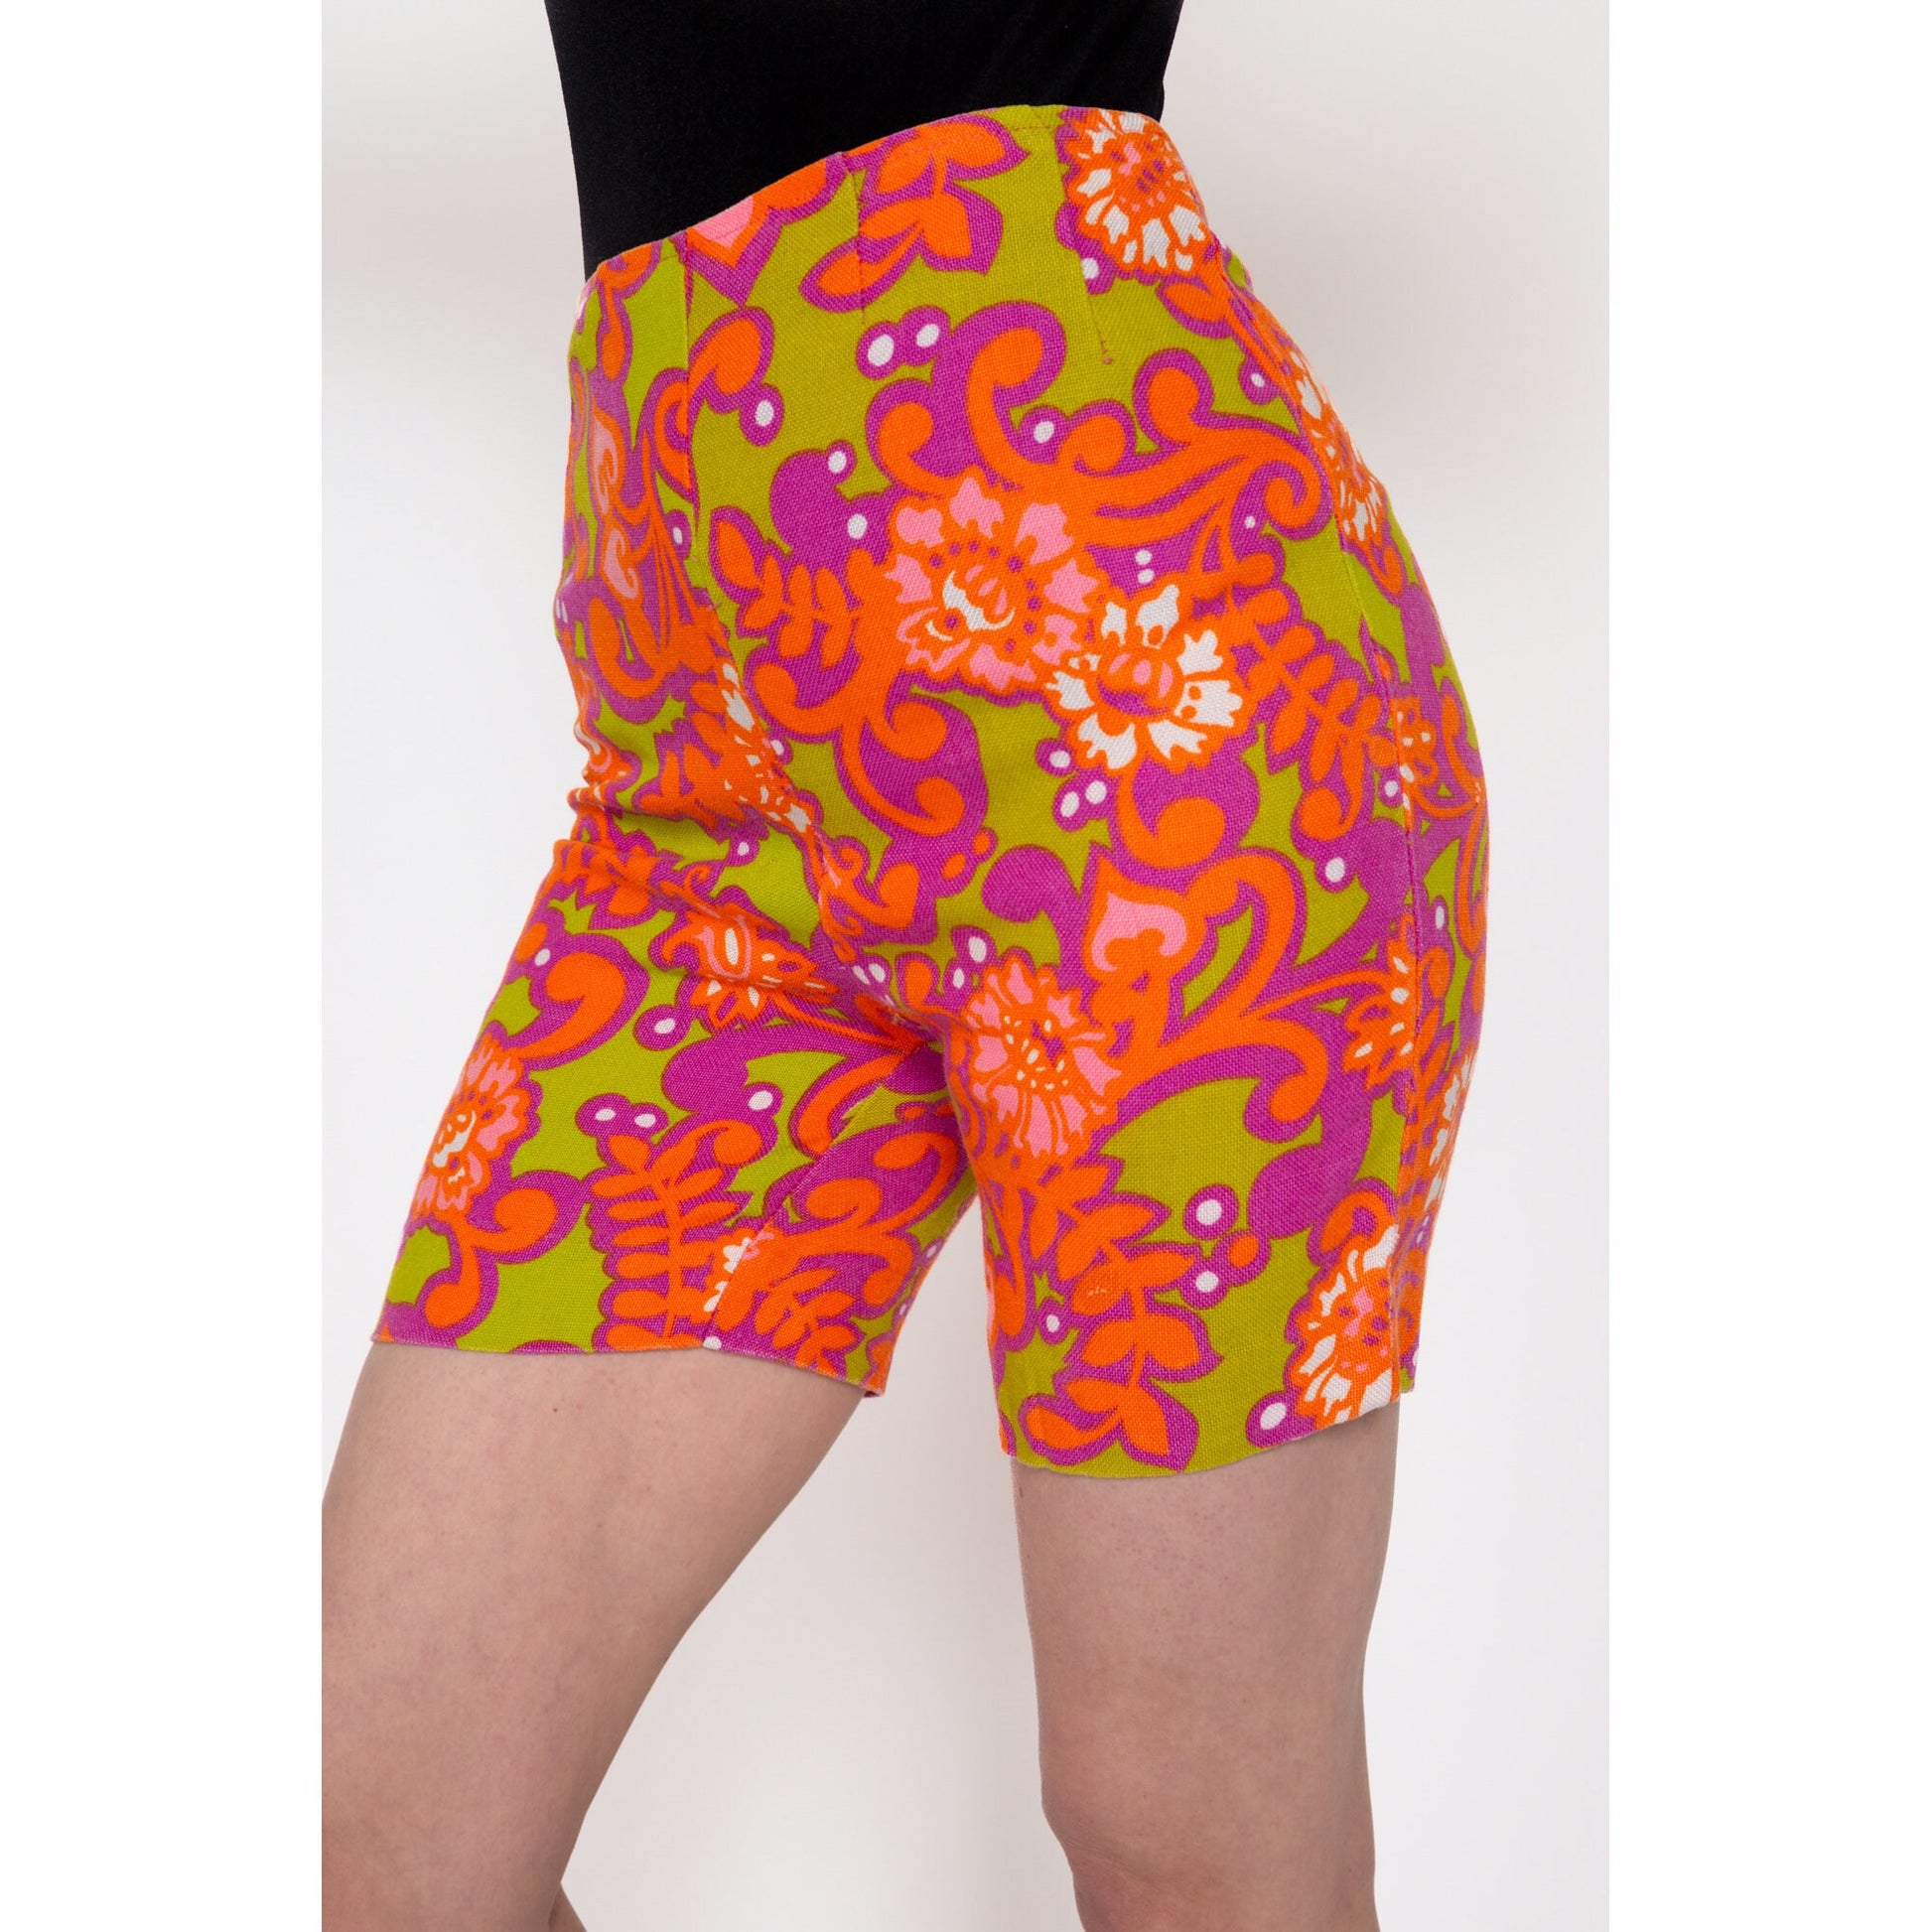 XXS 60s Psychedelic Flower Power Shorts 23.5" | Vintage High Waisted Floral Long Shorts